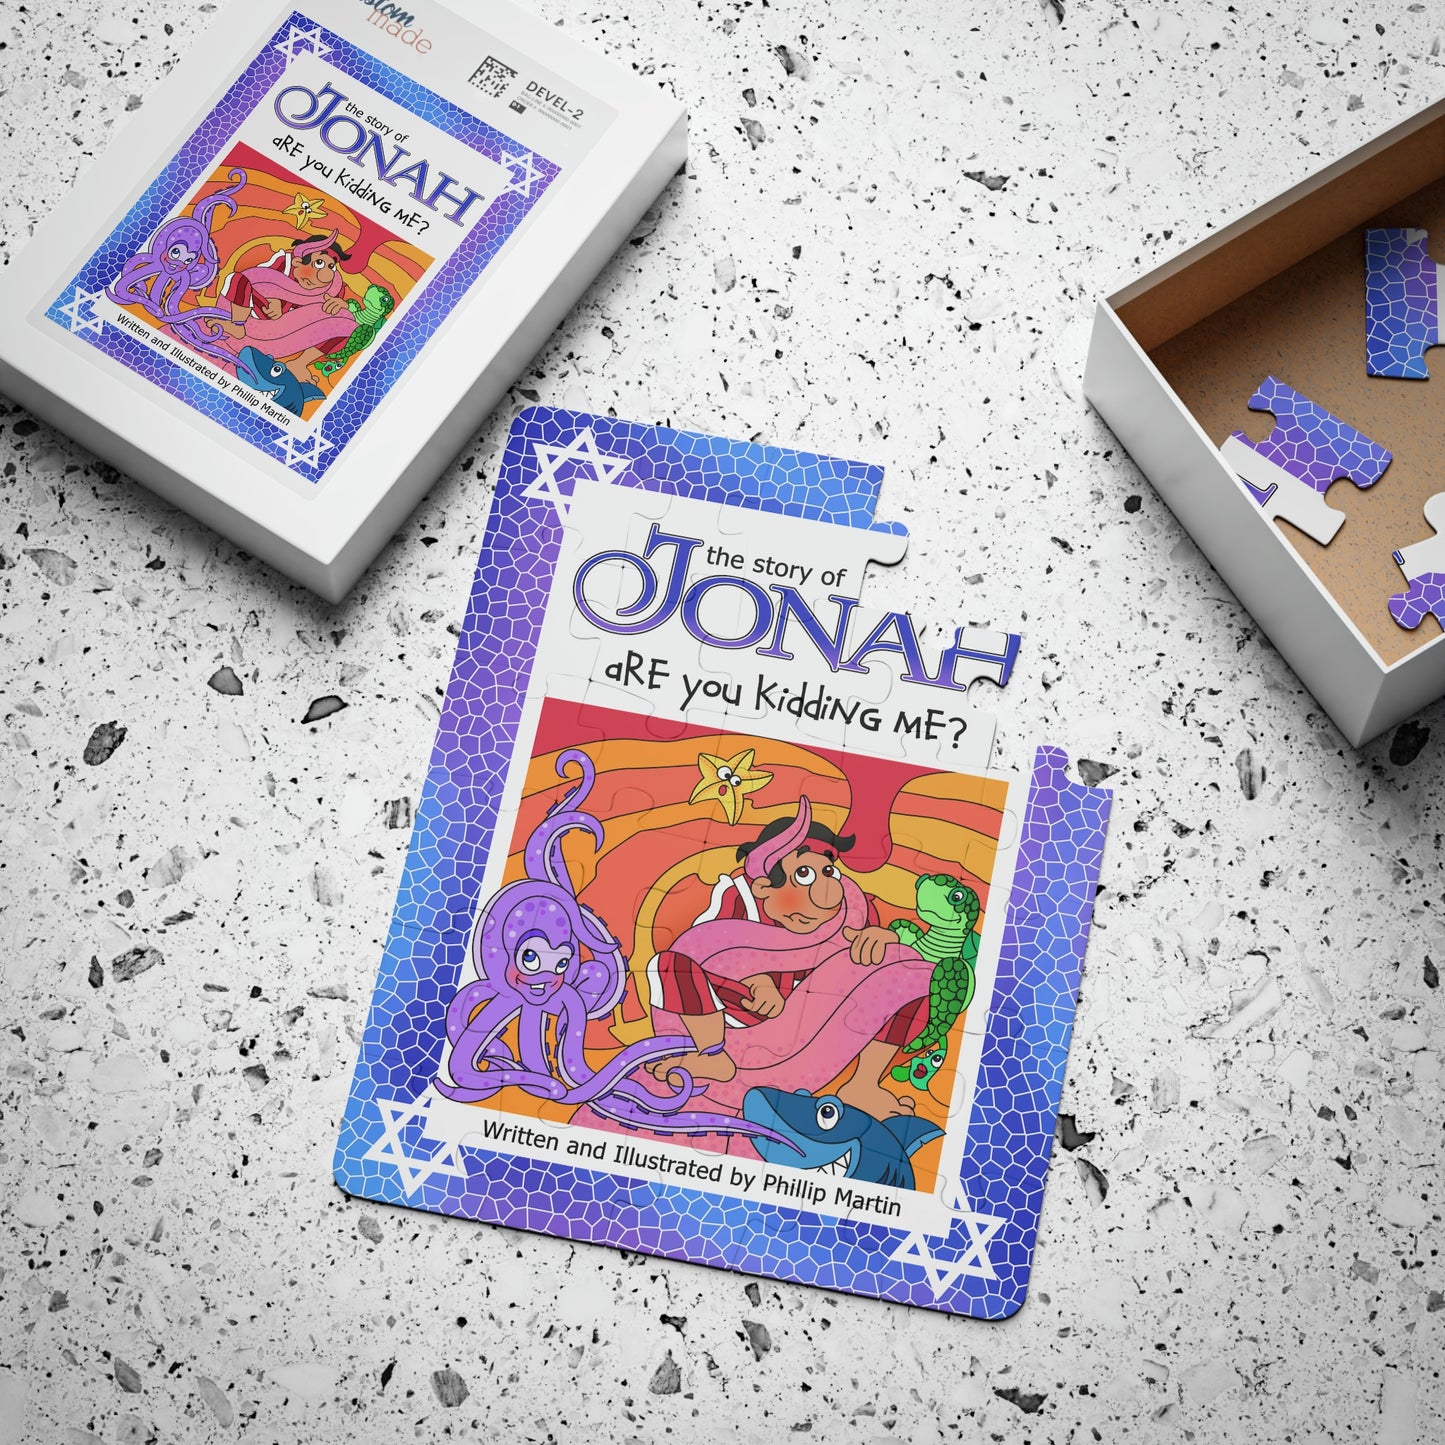 The Story of Jonah Kids' Puzzle, 30-Piece